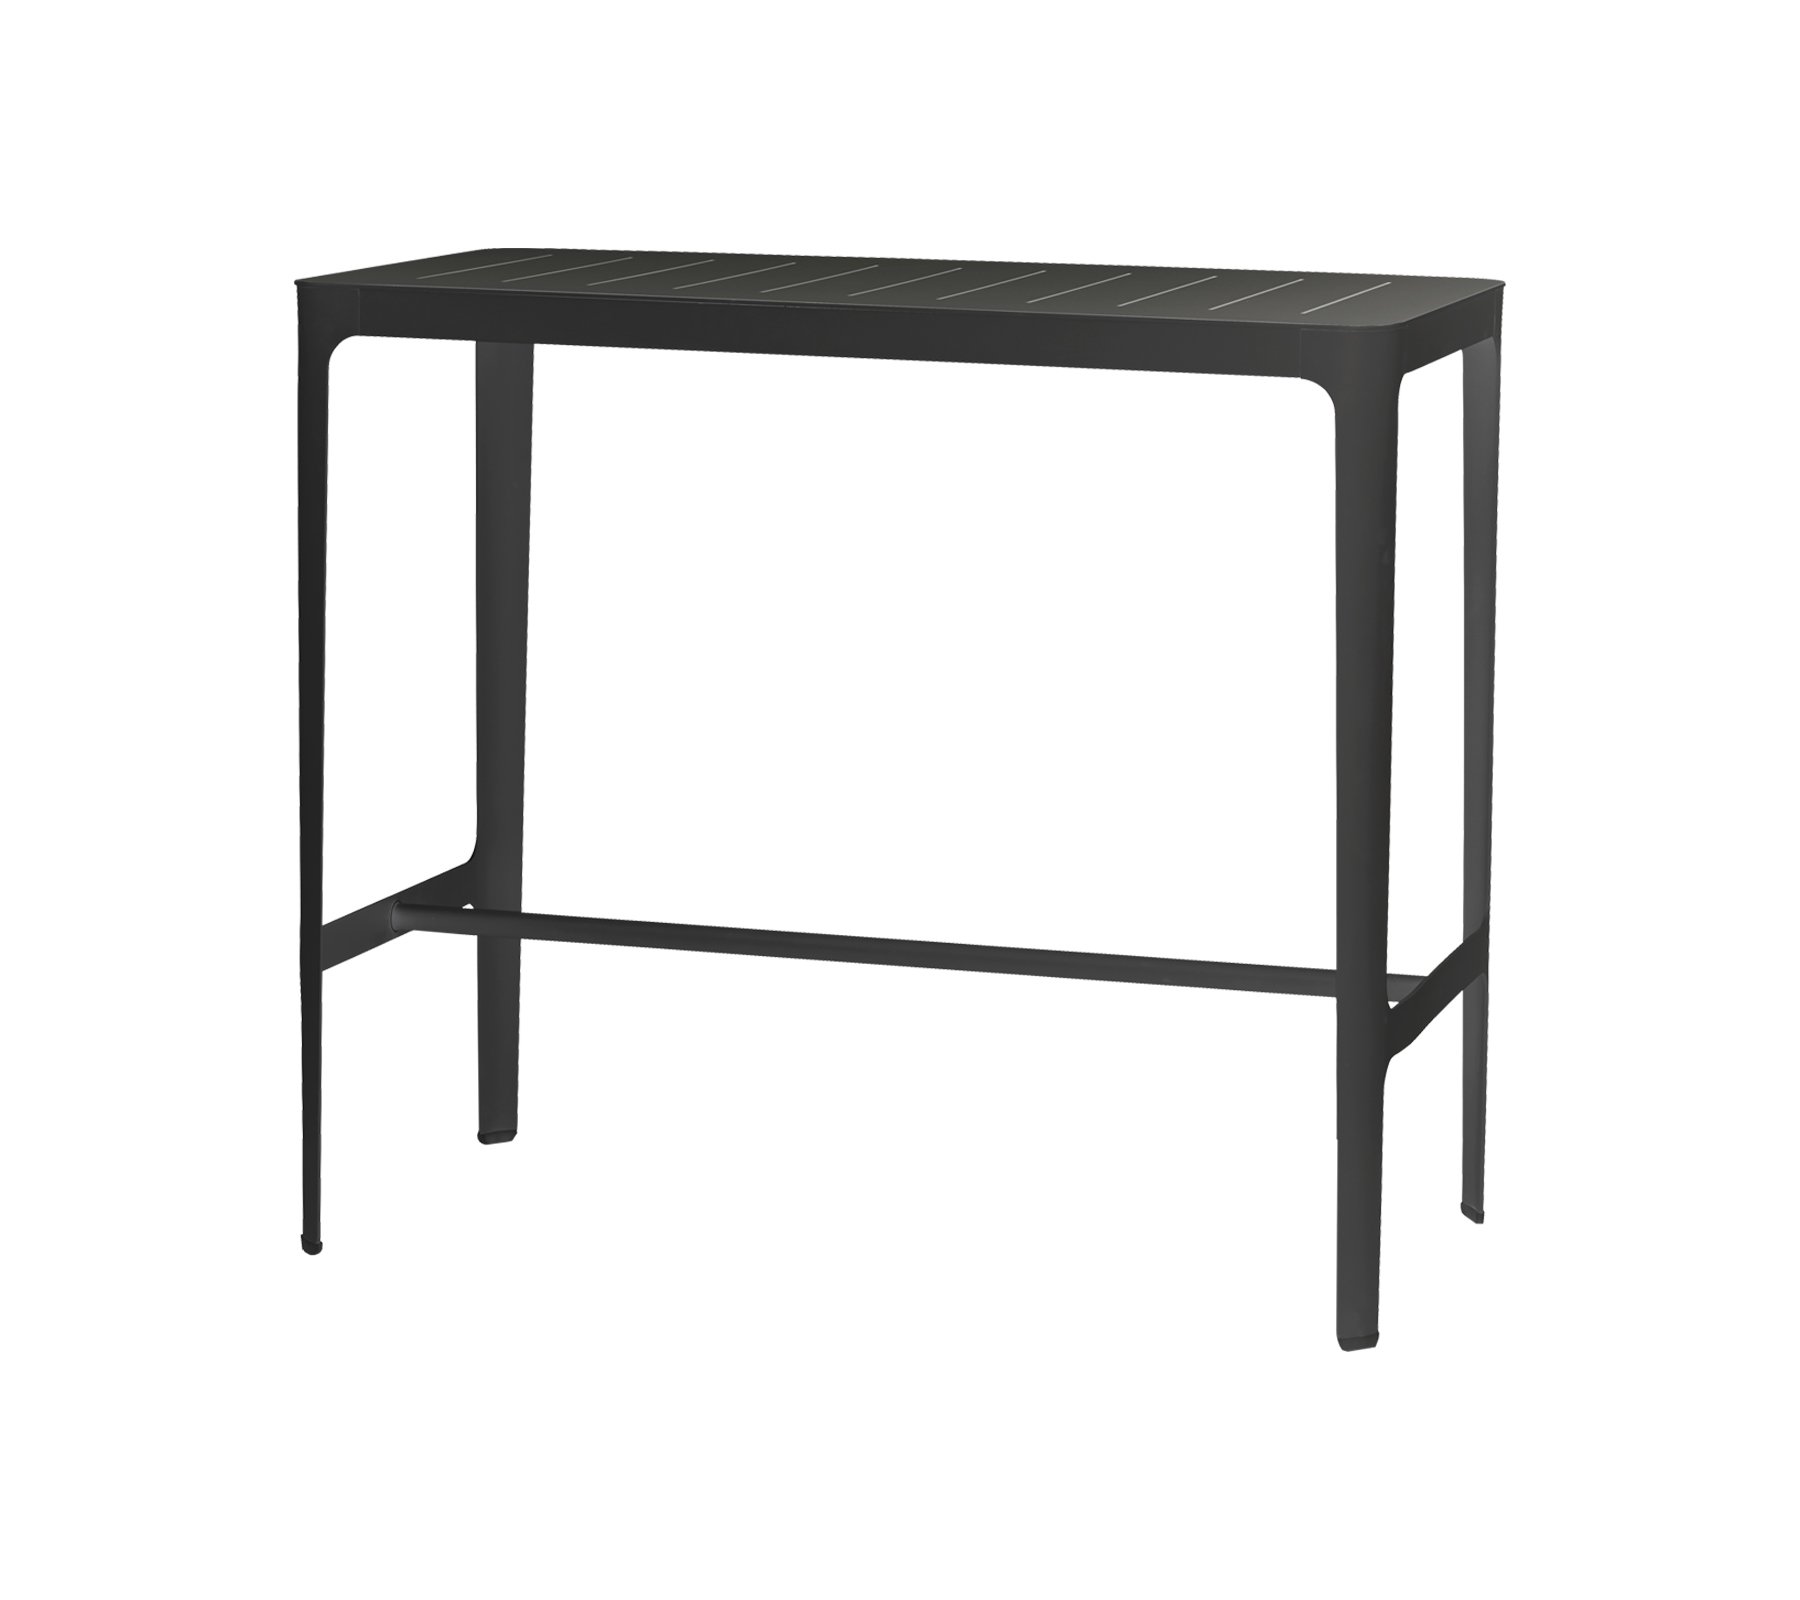 Cut Bar Table (11501) - Caneline Outdoor Tables